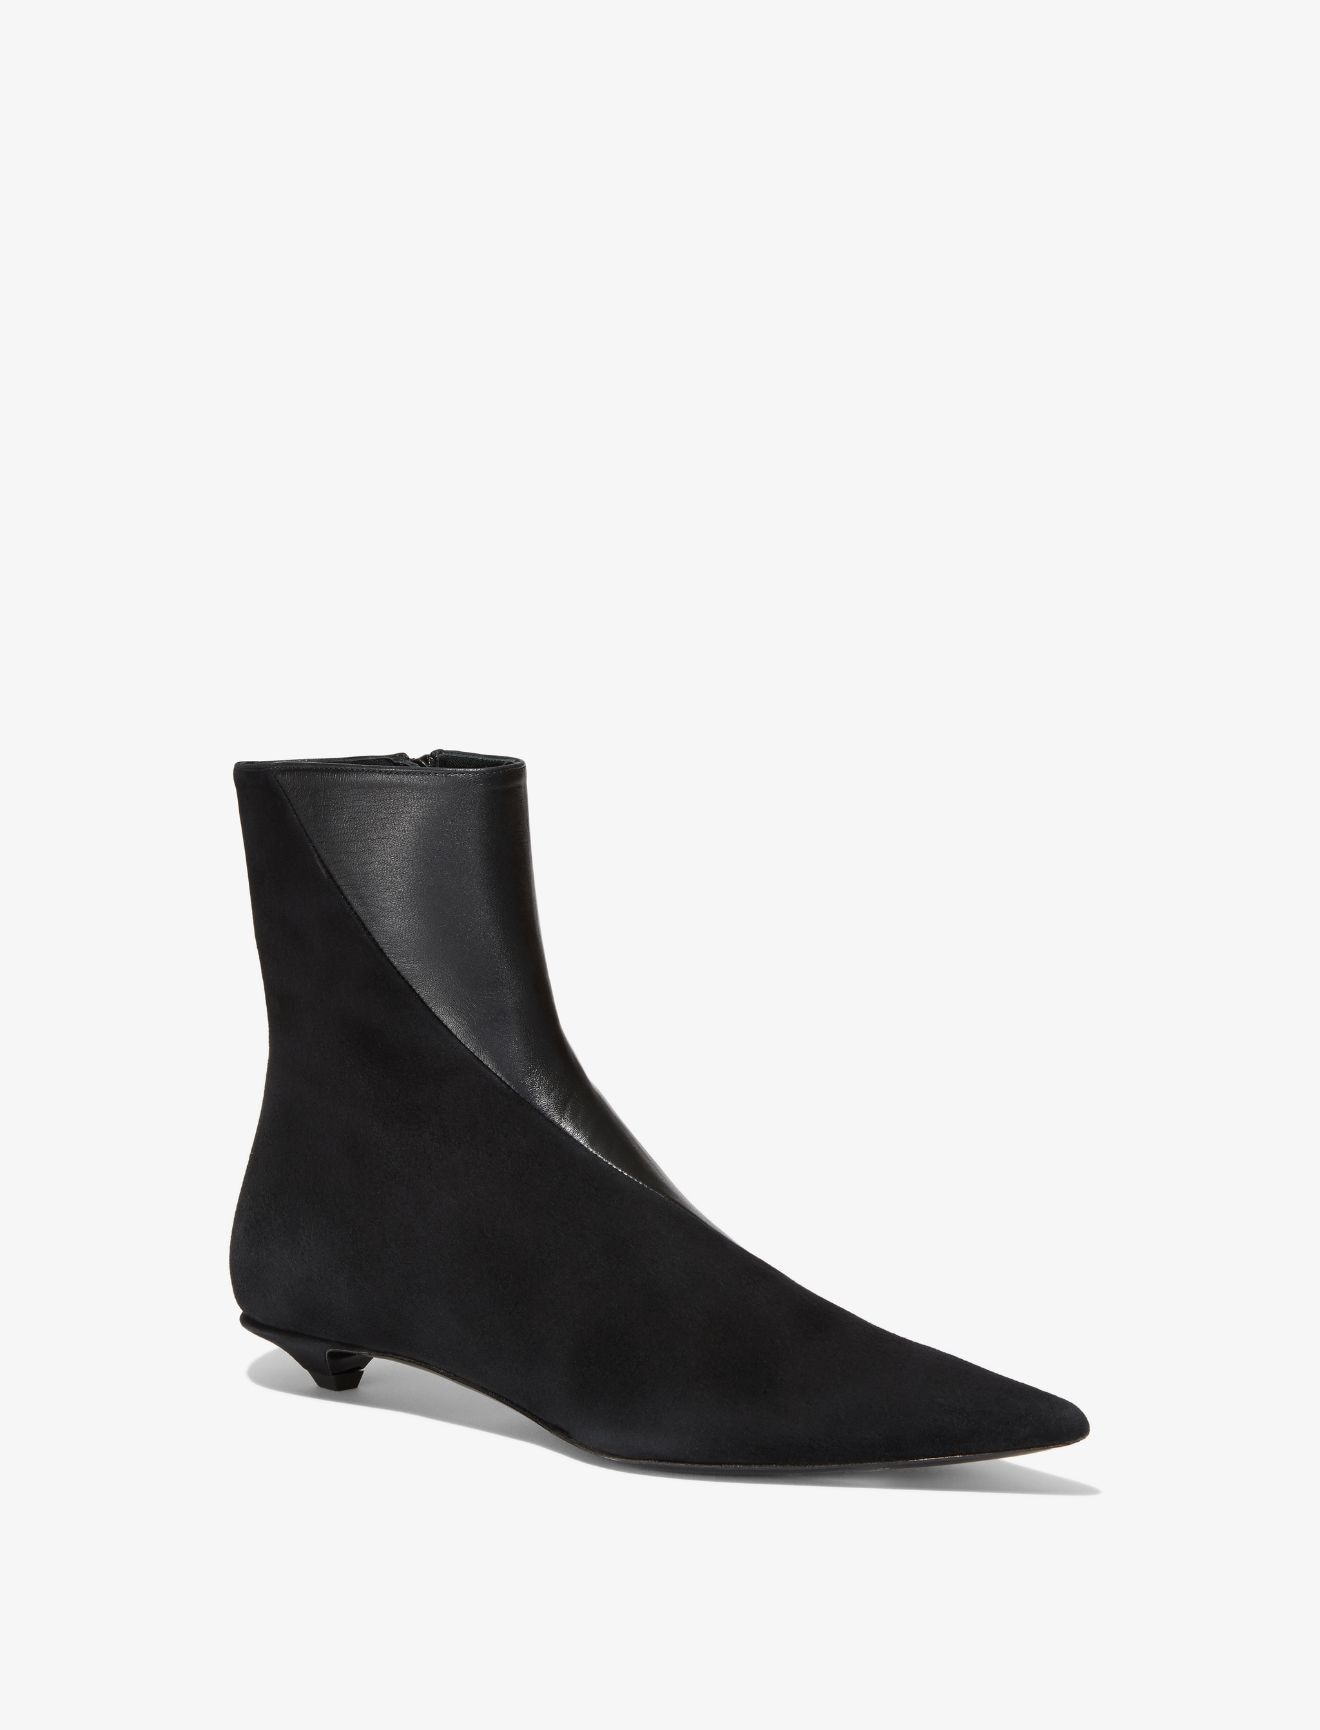 black pointed toe boots